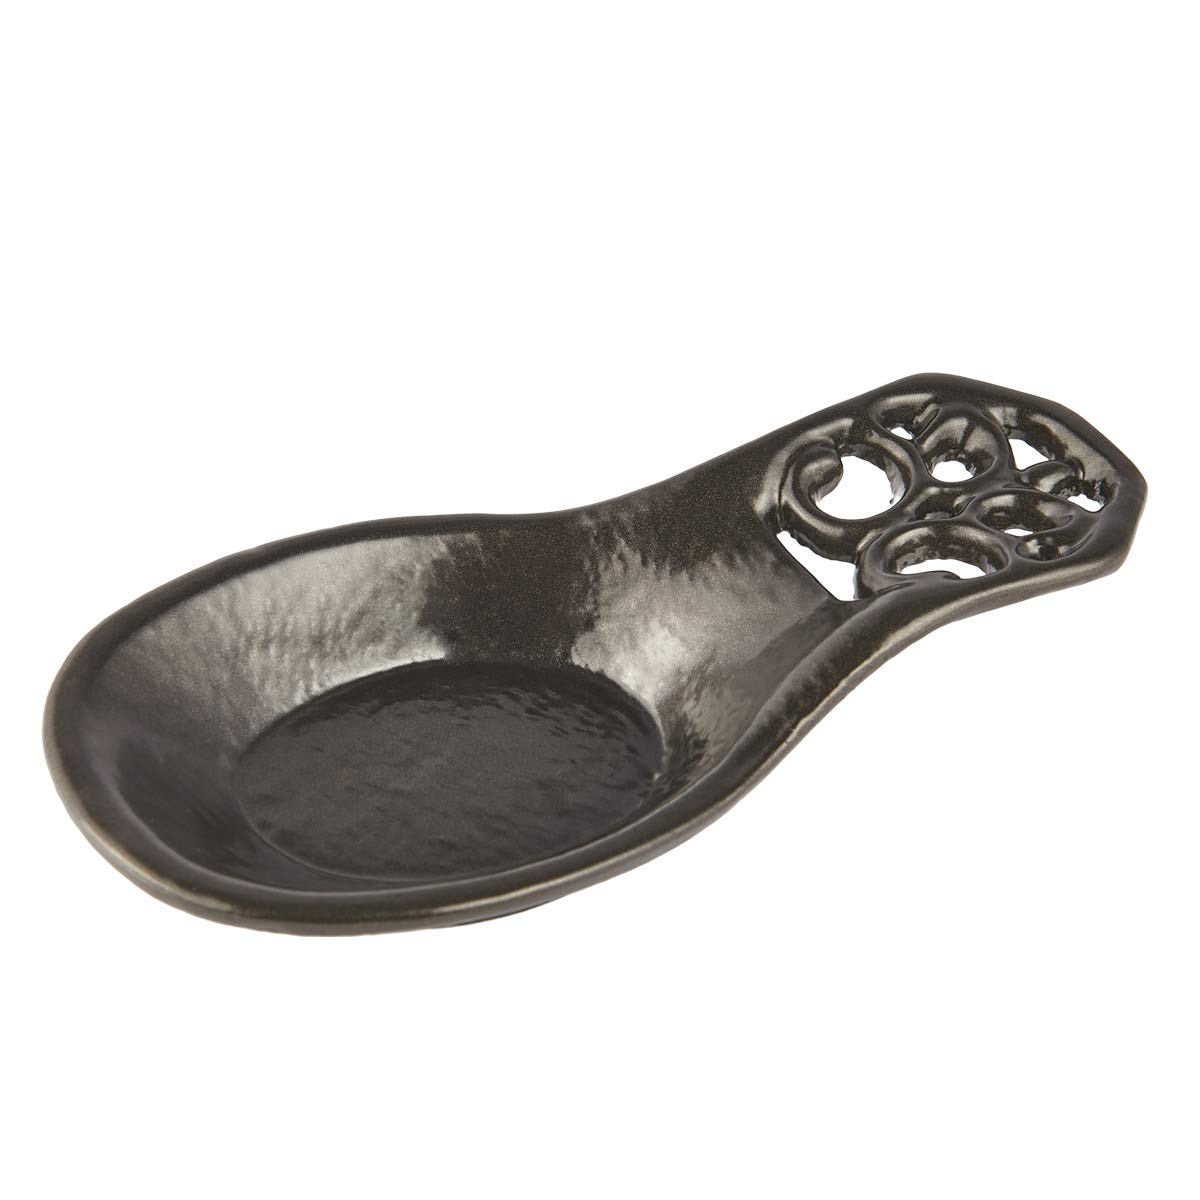 JOGREFUL Vintage Spoon Rest, Kitchen Spoon Rest Cast Iron Utensil Rest Ladle Spoon Holder For Cooking Home Decor, 793711, Coffee Gold Col